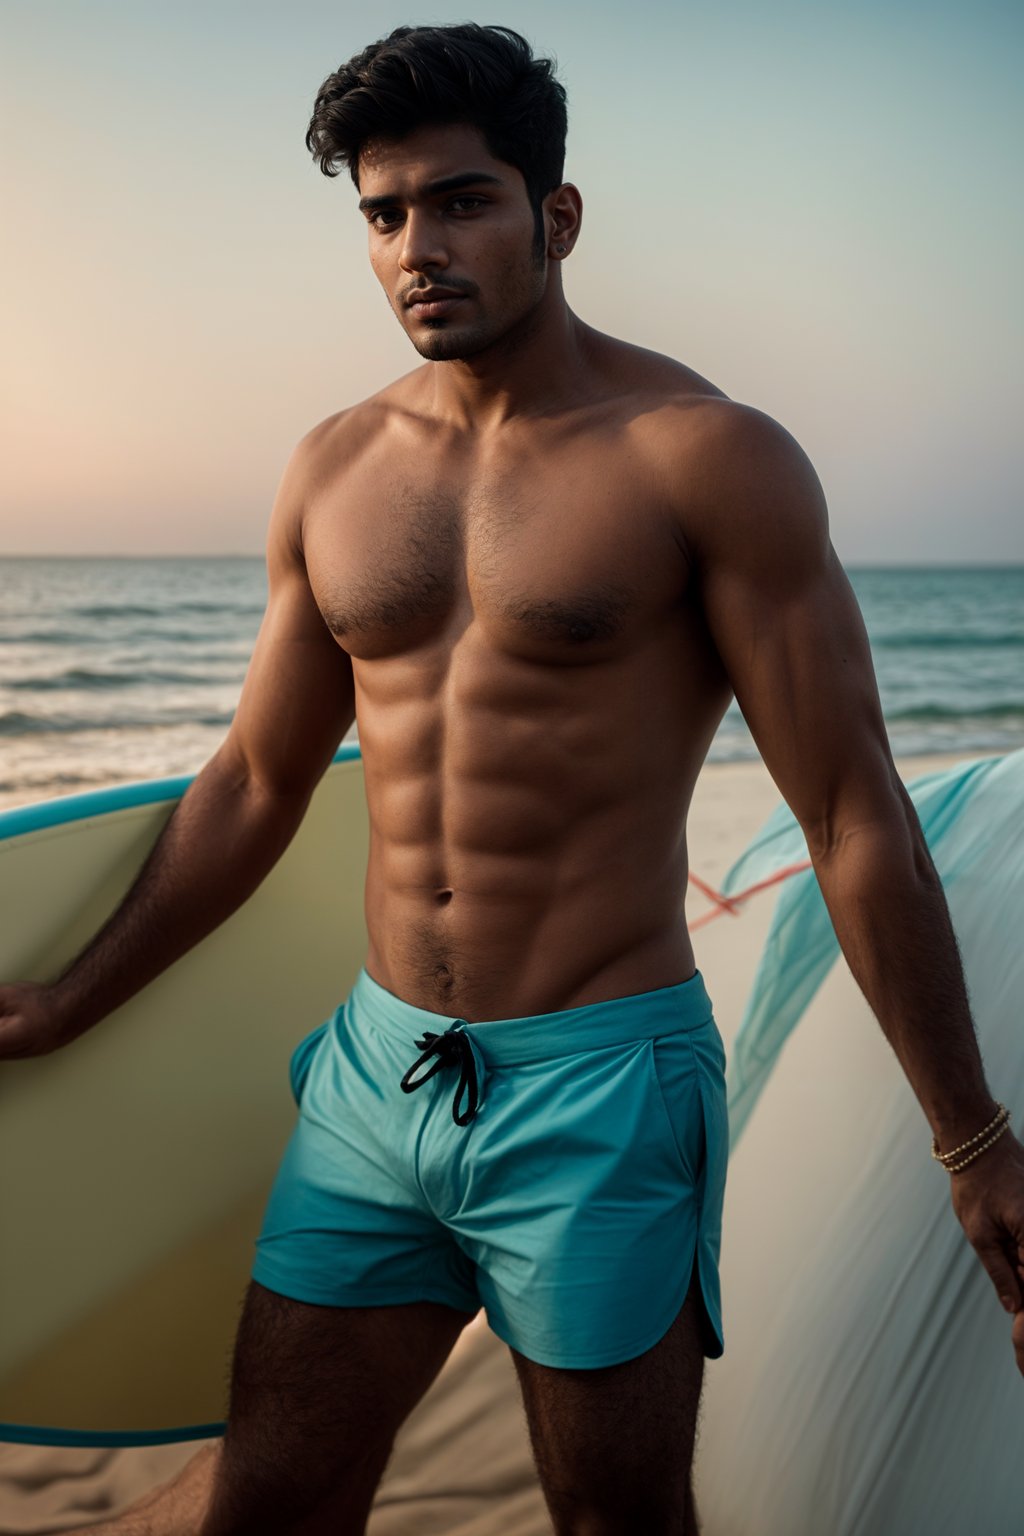 man in  board shorts with surfboard on the beach, ready to ride the waves